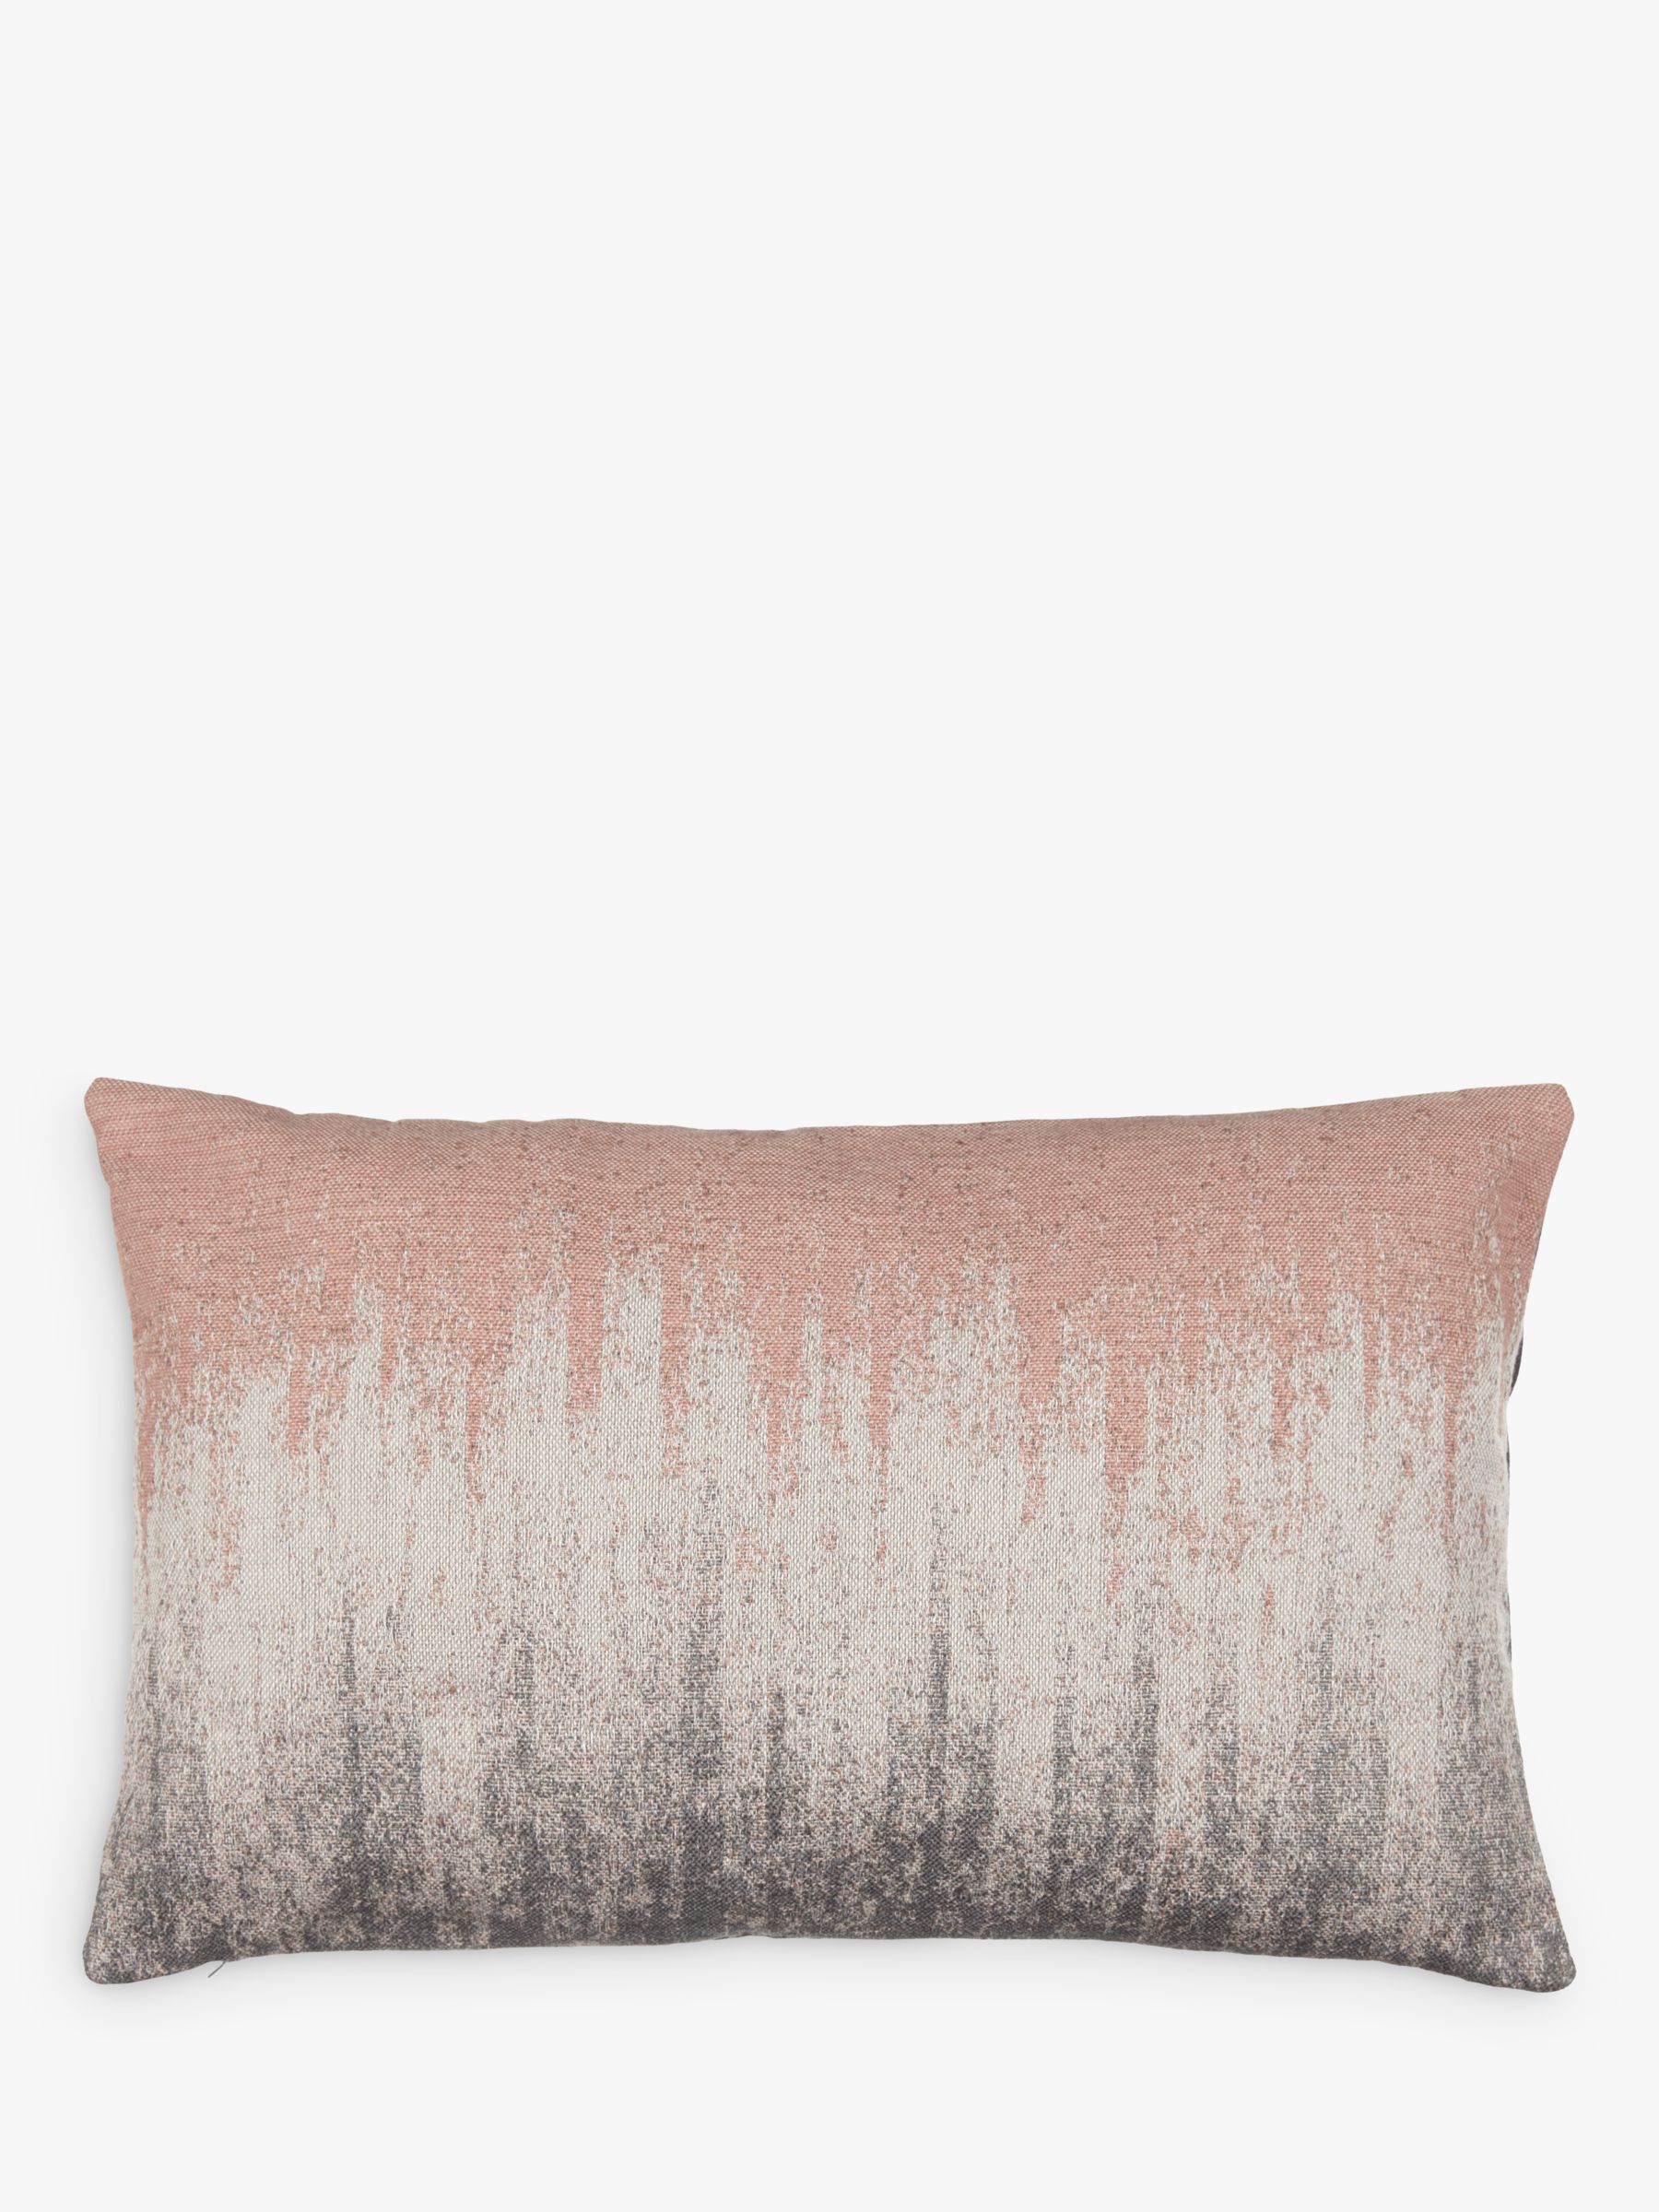 Design Project by John Lewis No.016 Cushion, Plaster